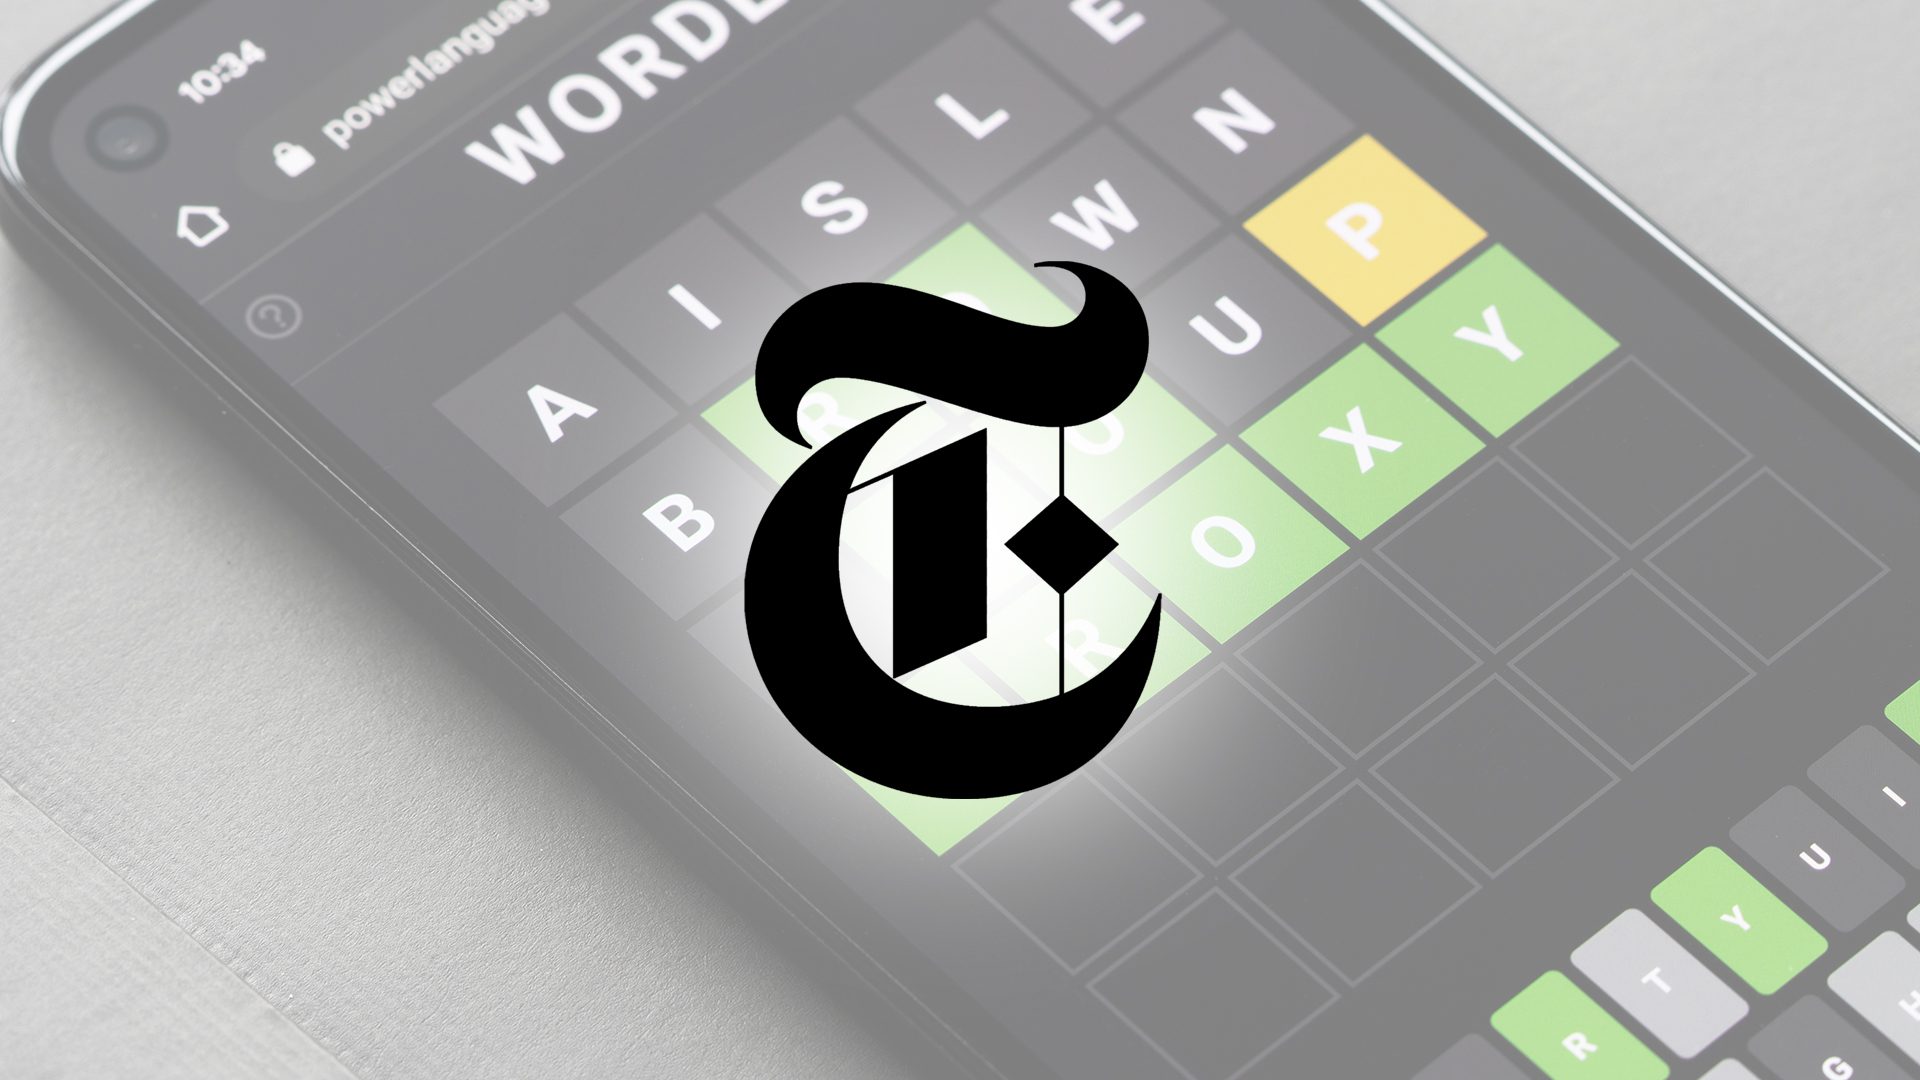 The New York Times acquires Wordle